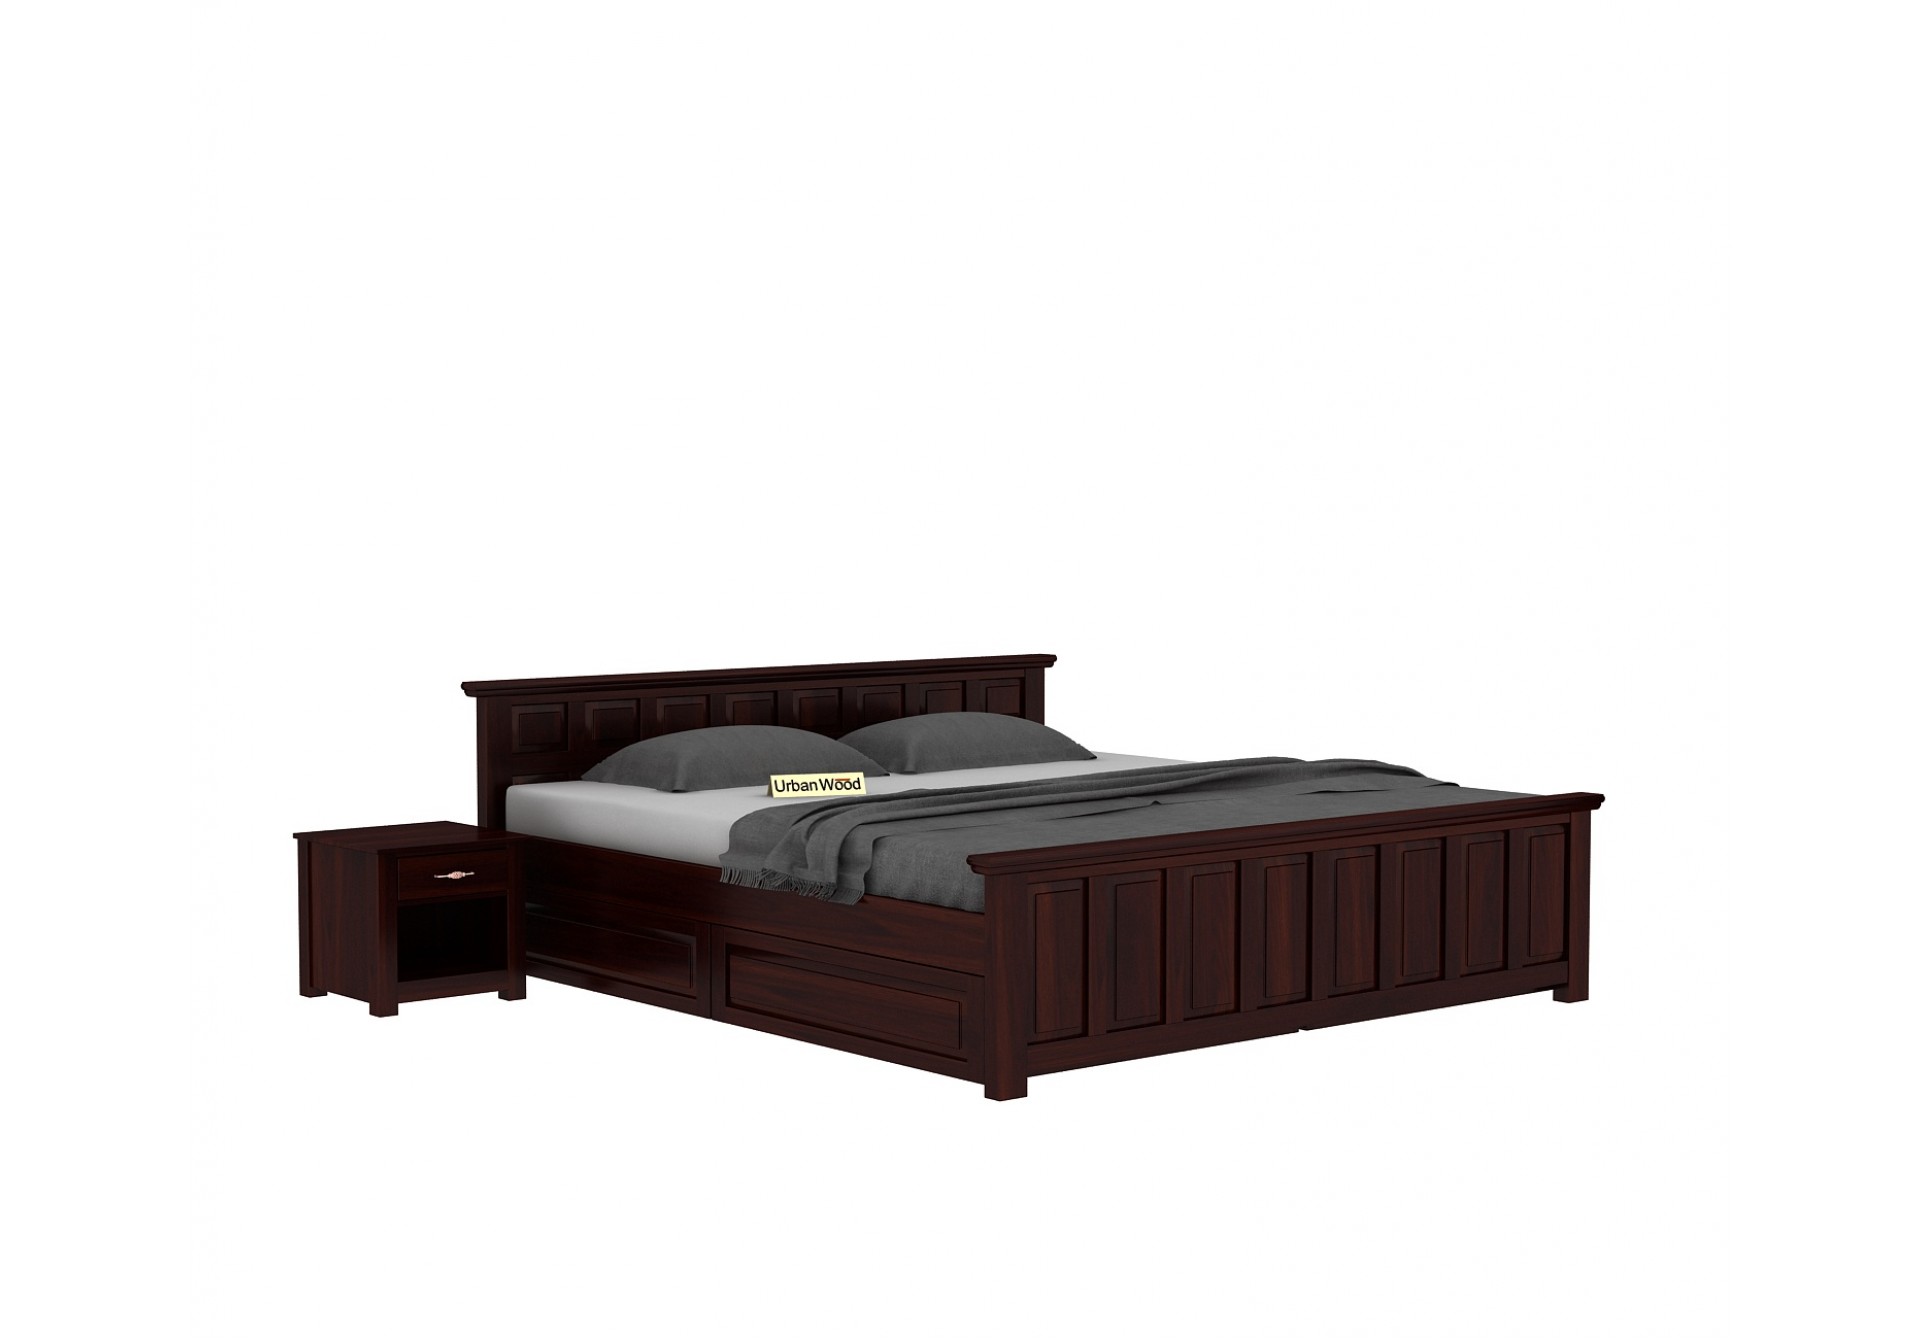 Thoms Bed With Drawer Storage ( Queen Size, Walnut Finish )